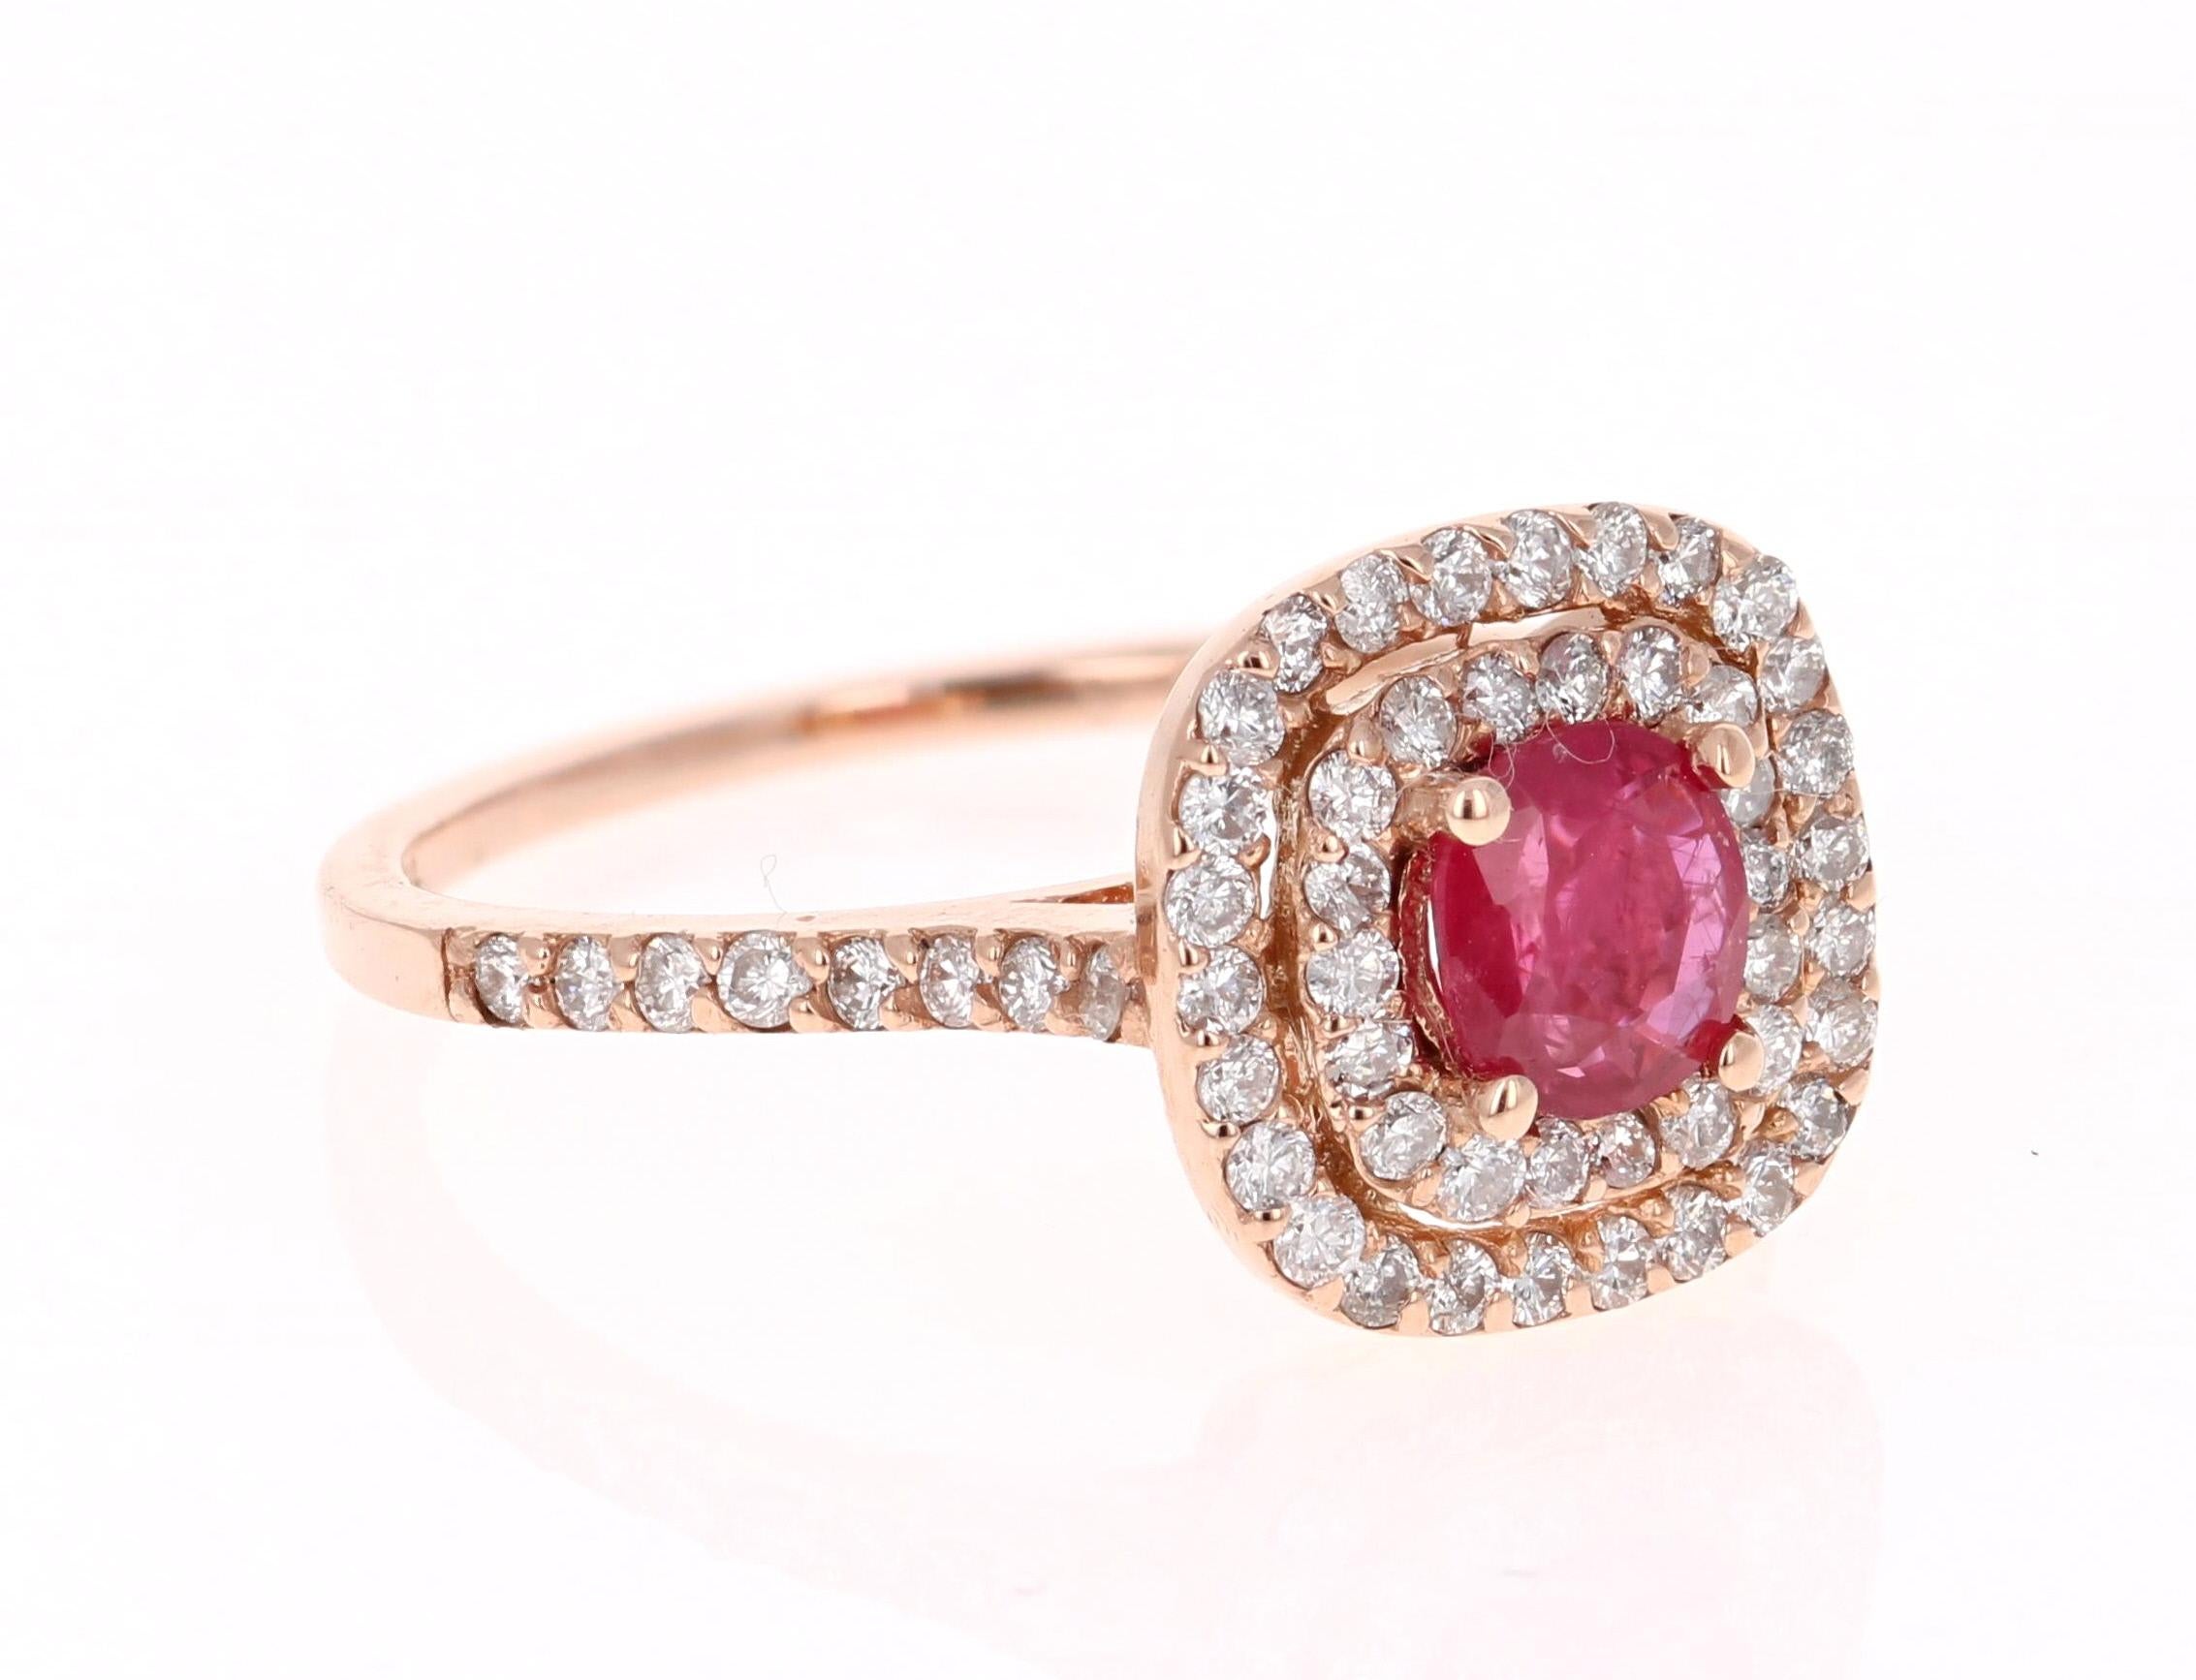 Simply beautiful Ruby Diamond Ring with a Round Cut 0.68 Carat Burmese Ruby which is surrounded by a double halo of 62 Round Cut Diamonds that weigh 0.60 carats. The total carat weight of the ring is 1.28 carats. The clarity and color of the